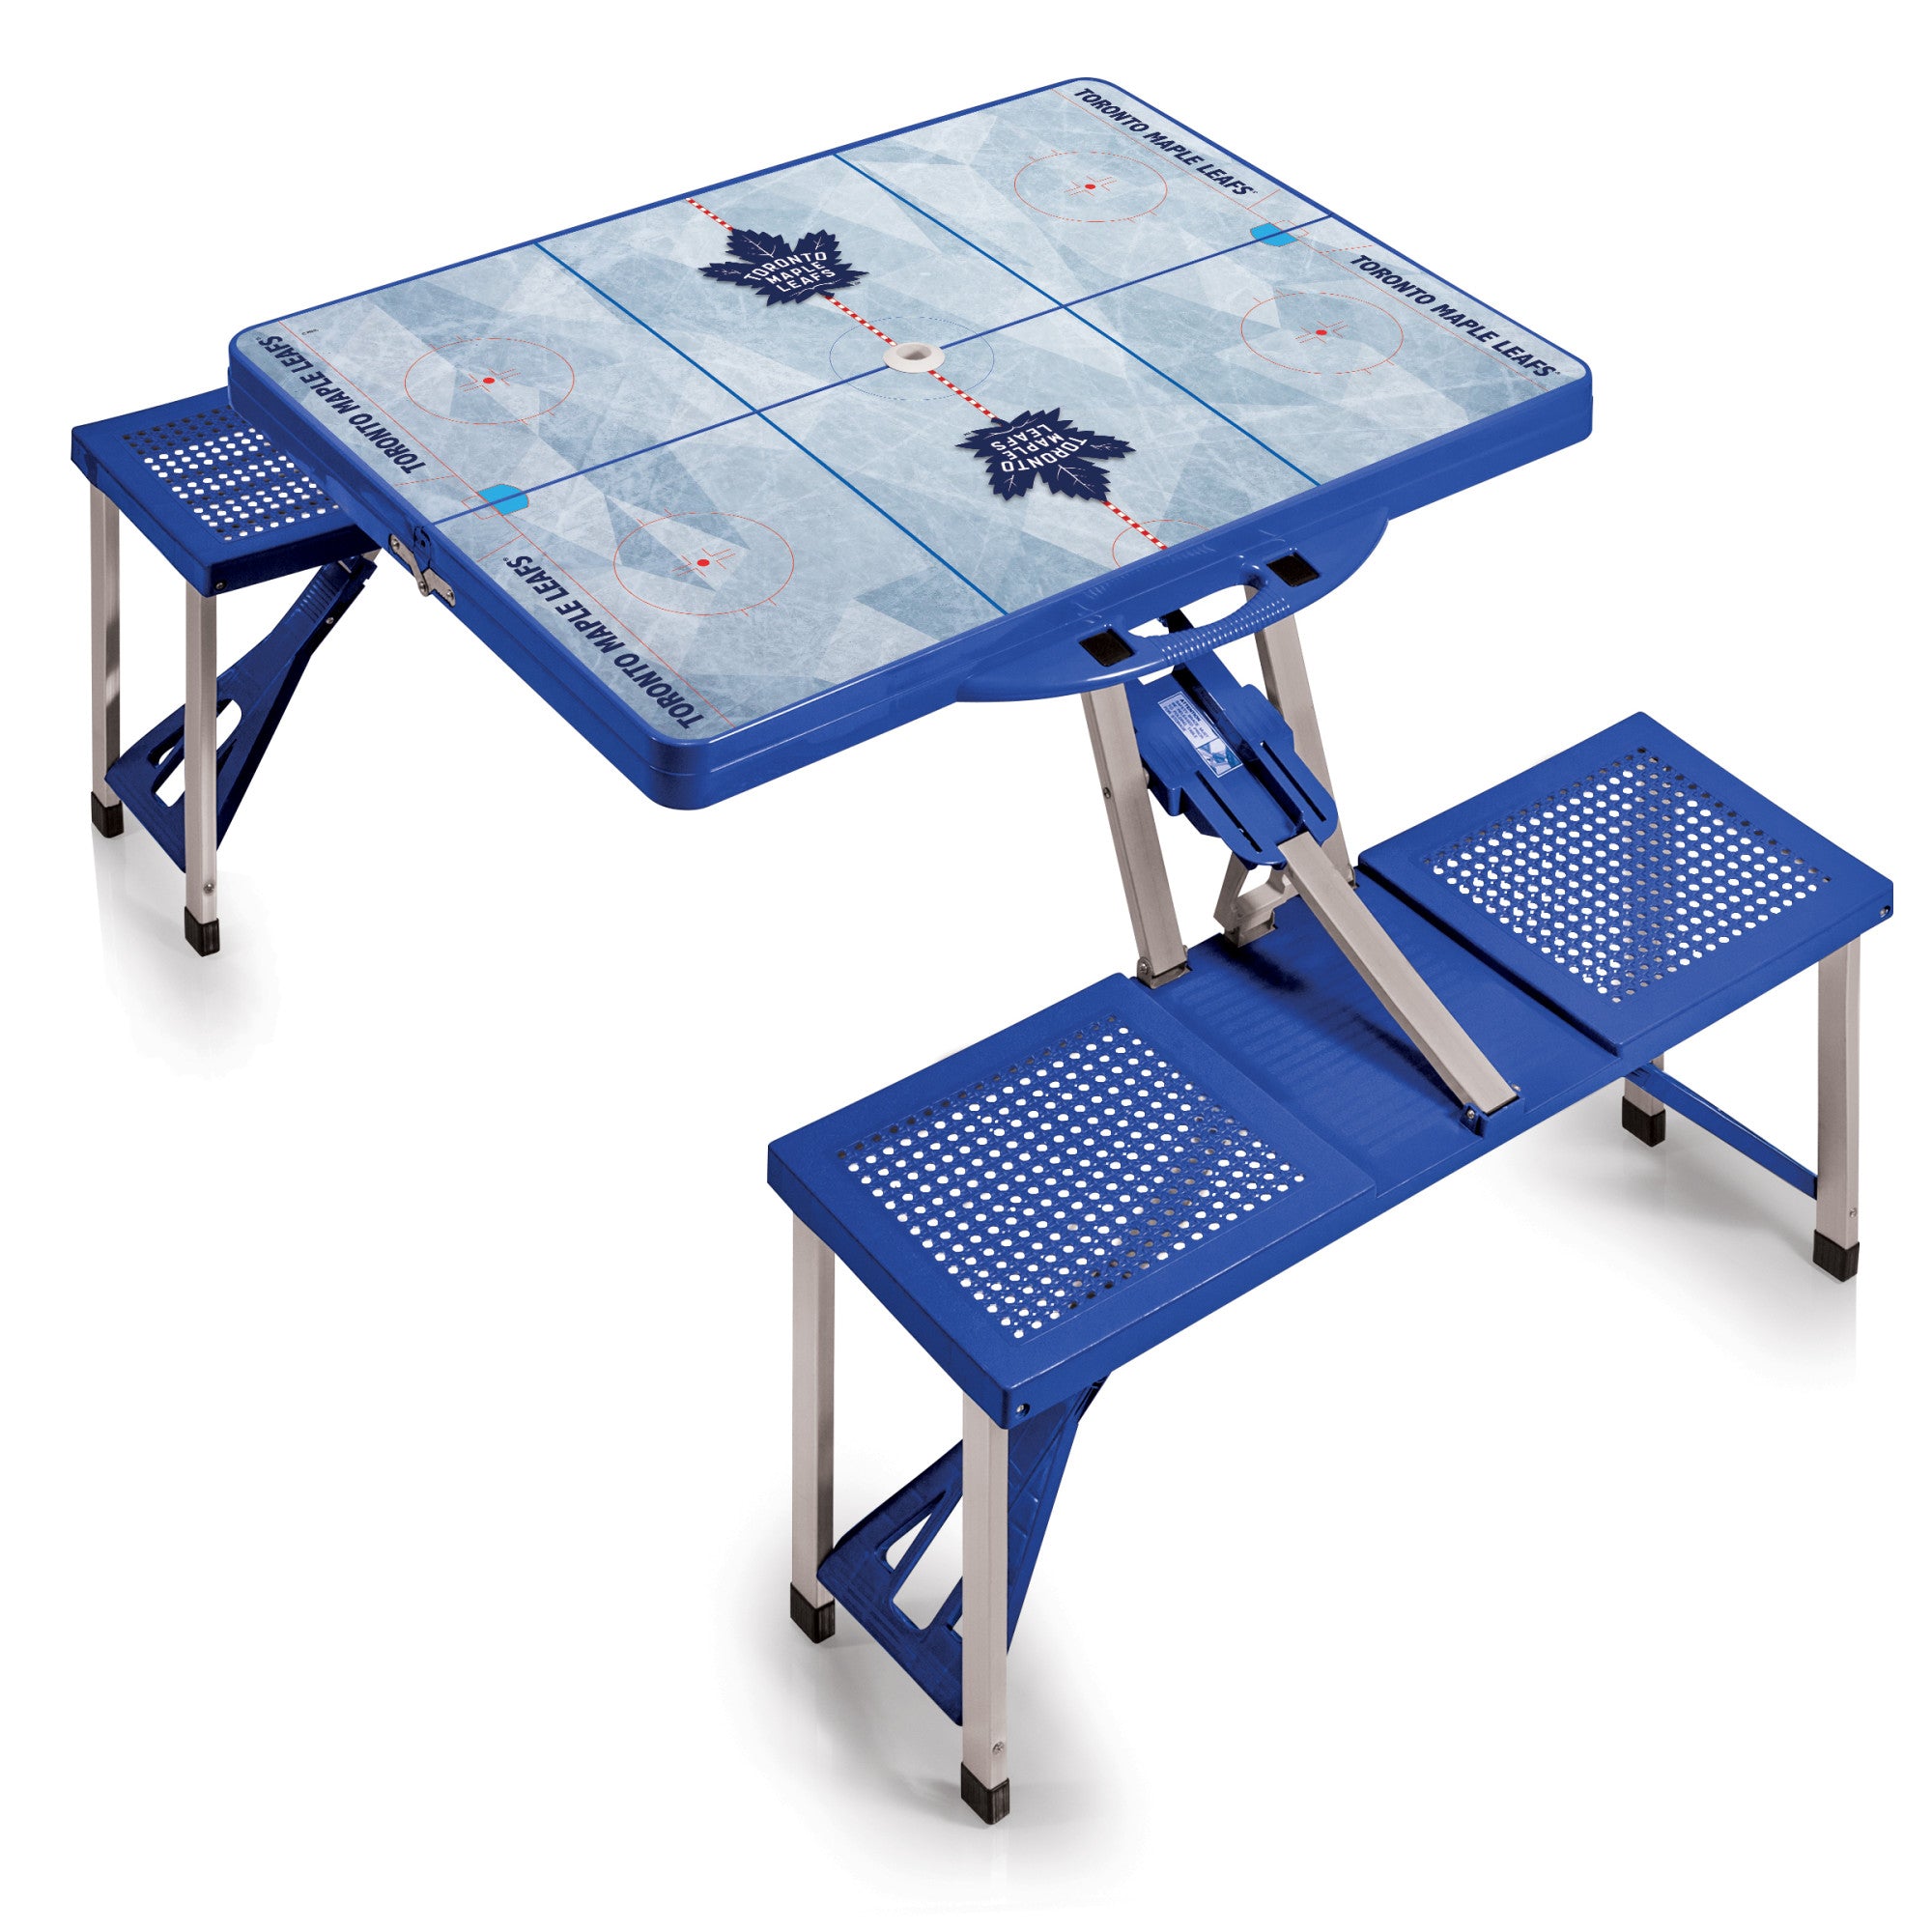 Toronto Maple Leafs Hockey Rink - Picnic Table Portable Folding Table with Seats